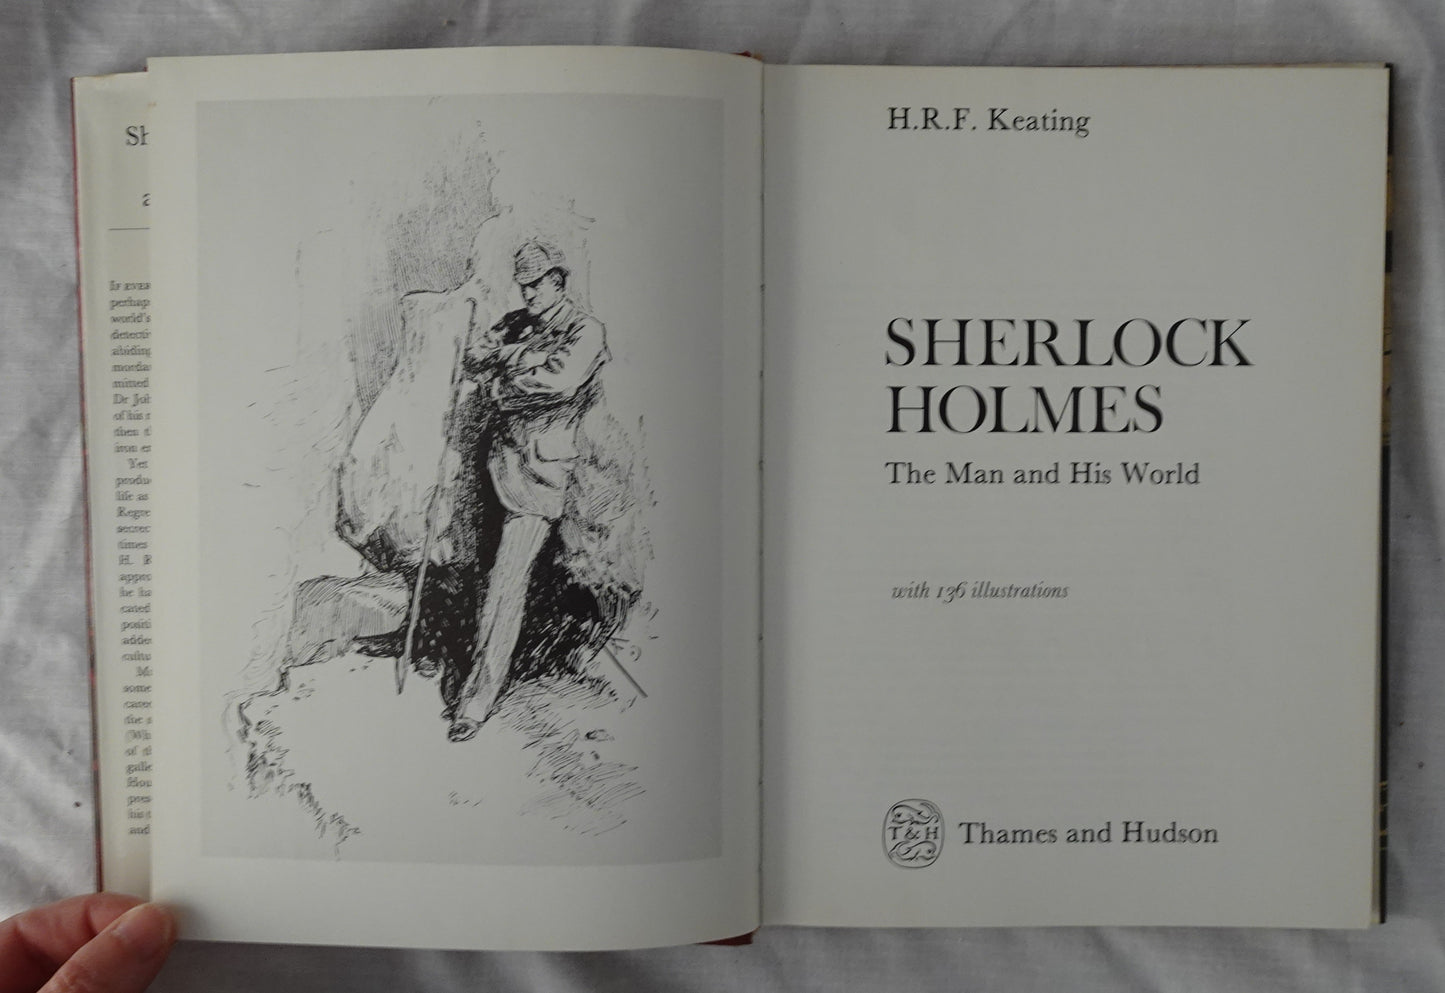 Sherlock Homes The Man and His World by H. R. F. Keating